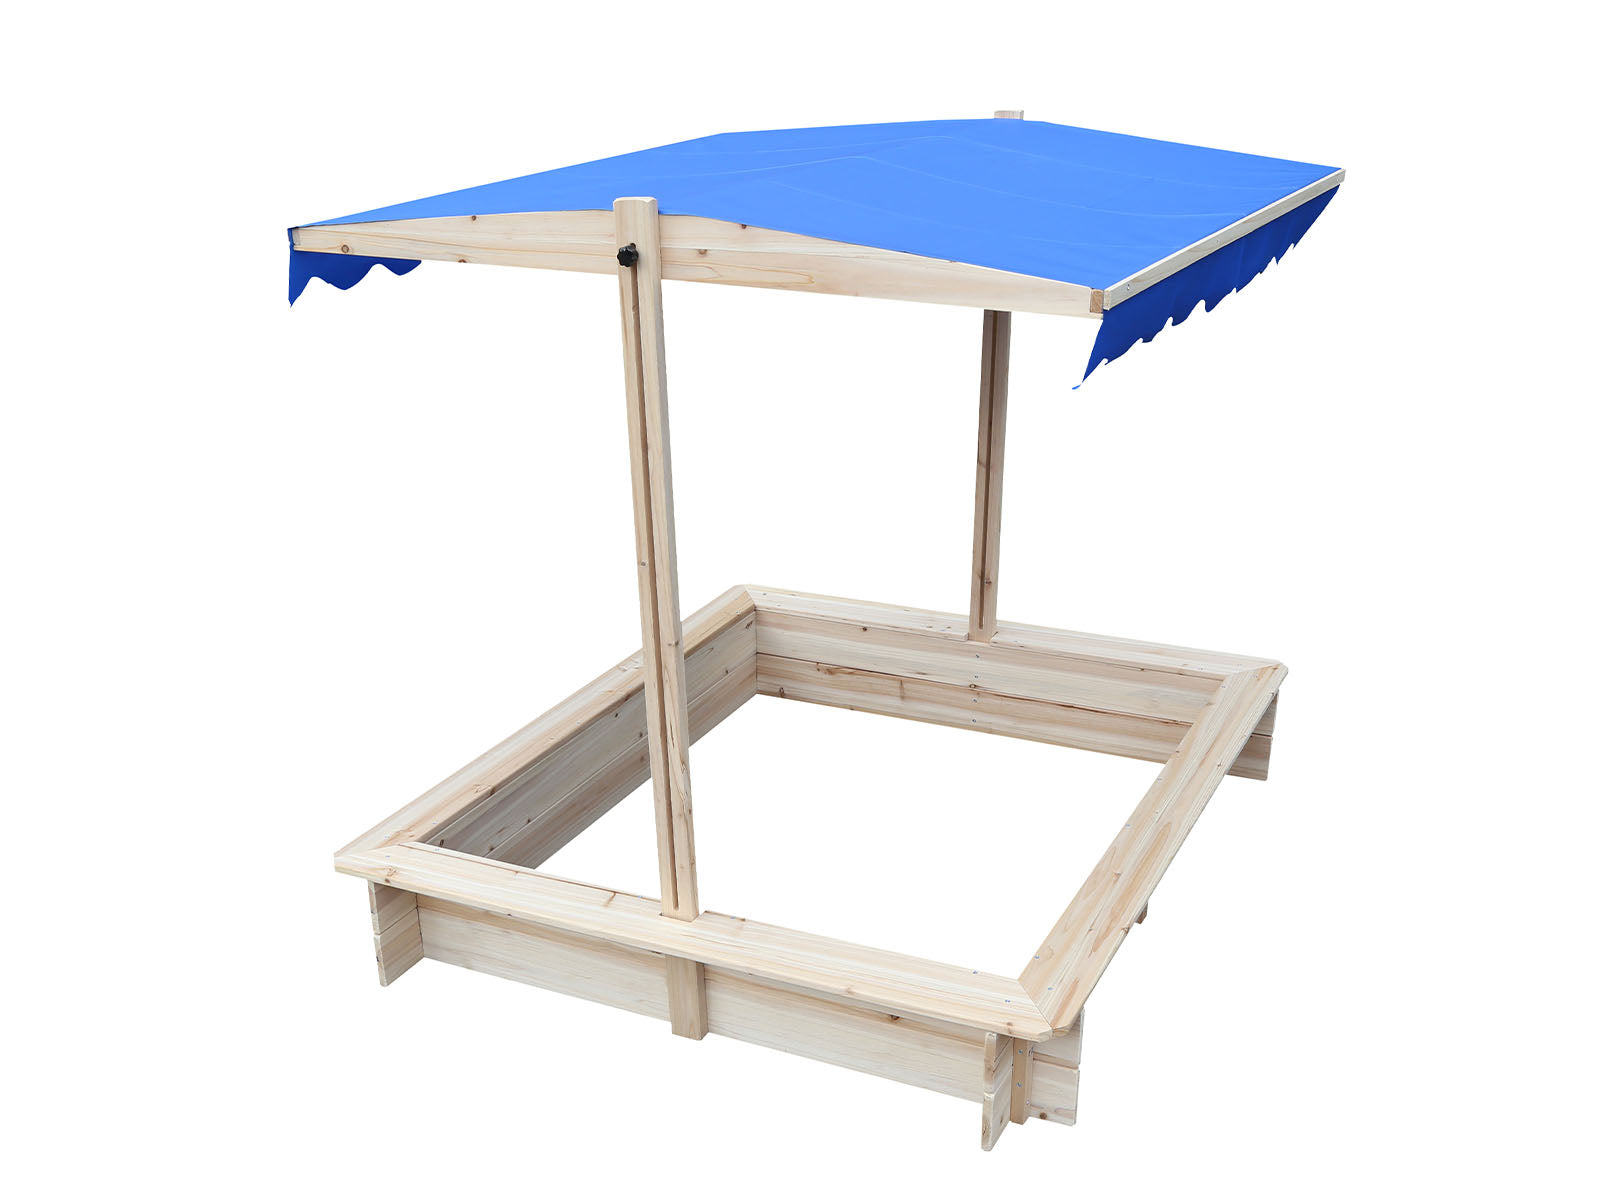 Wooden Sandpit With Canopy